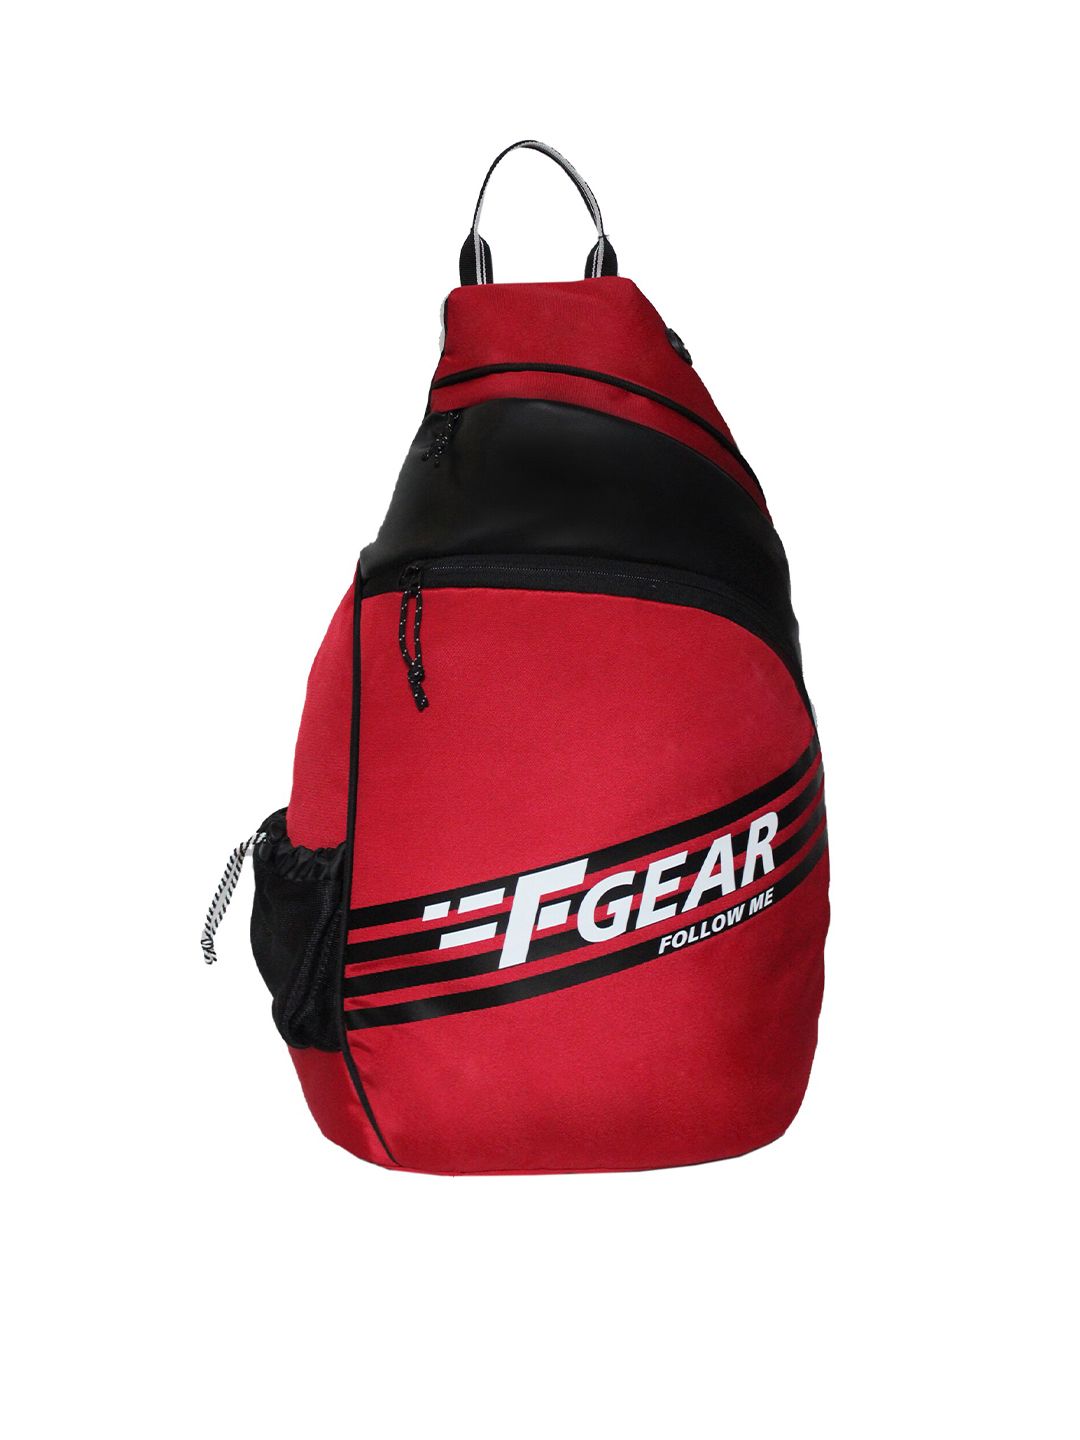 F Gear Unisex Red & Black Backpack Price in India